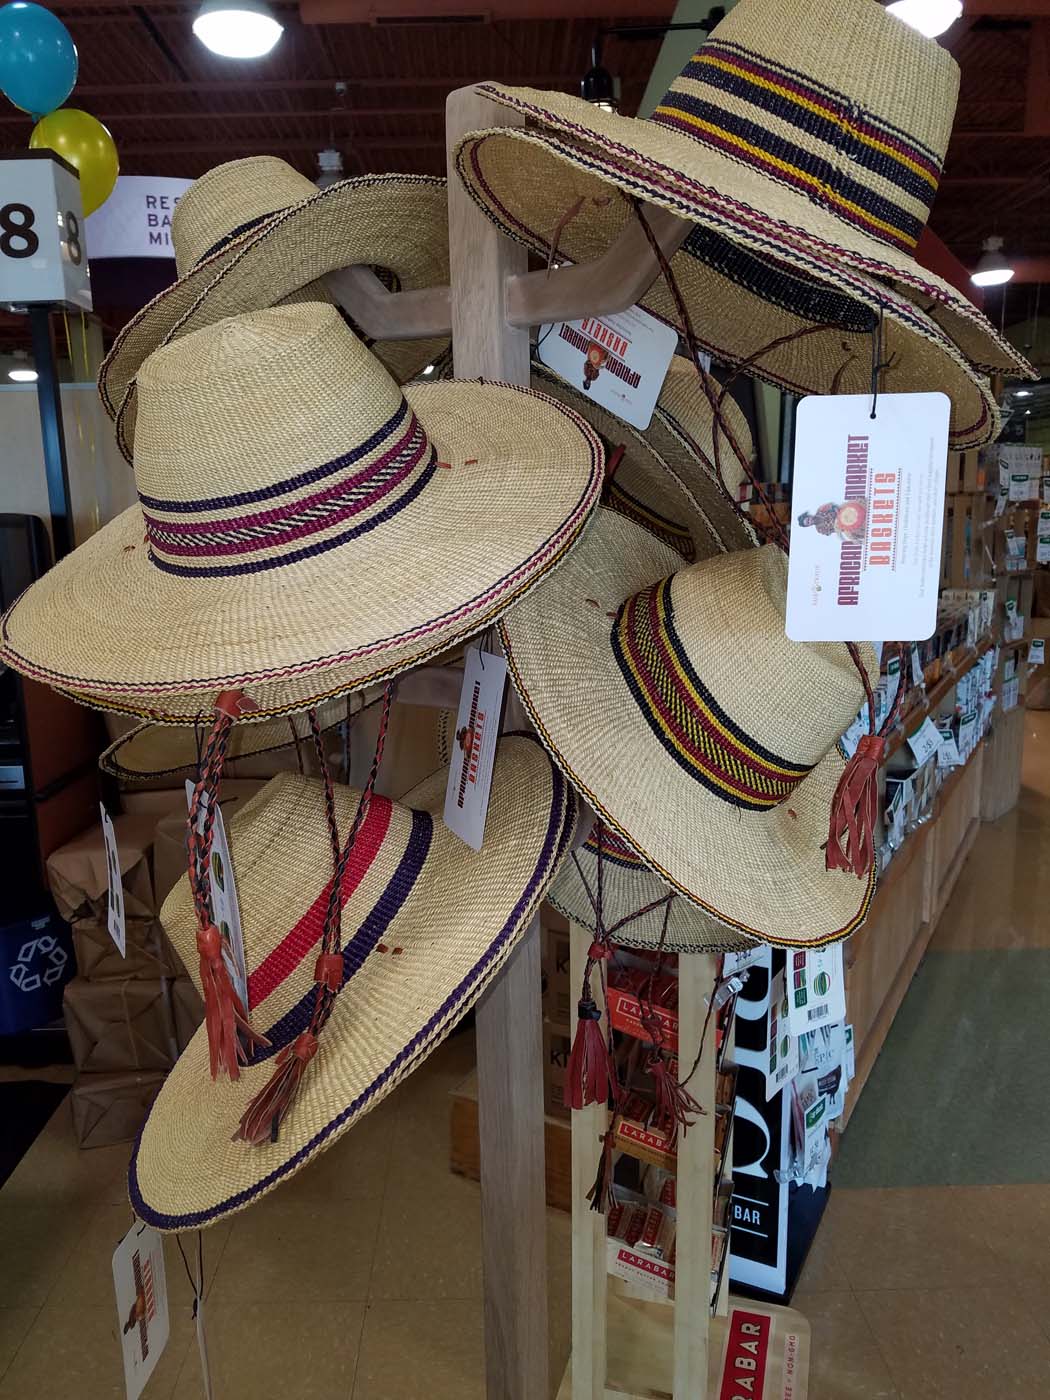 Bolga hats can be hung easily on existing displays